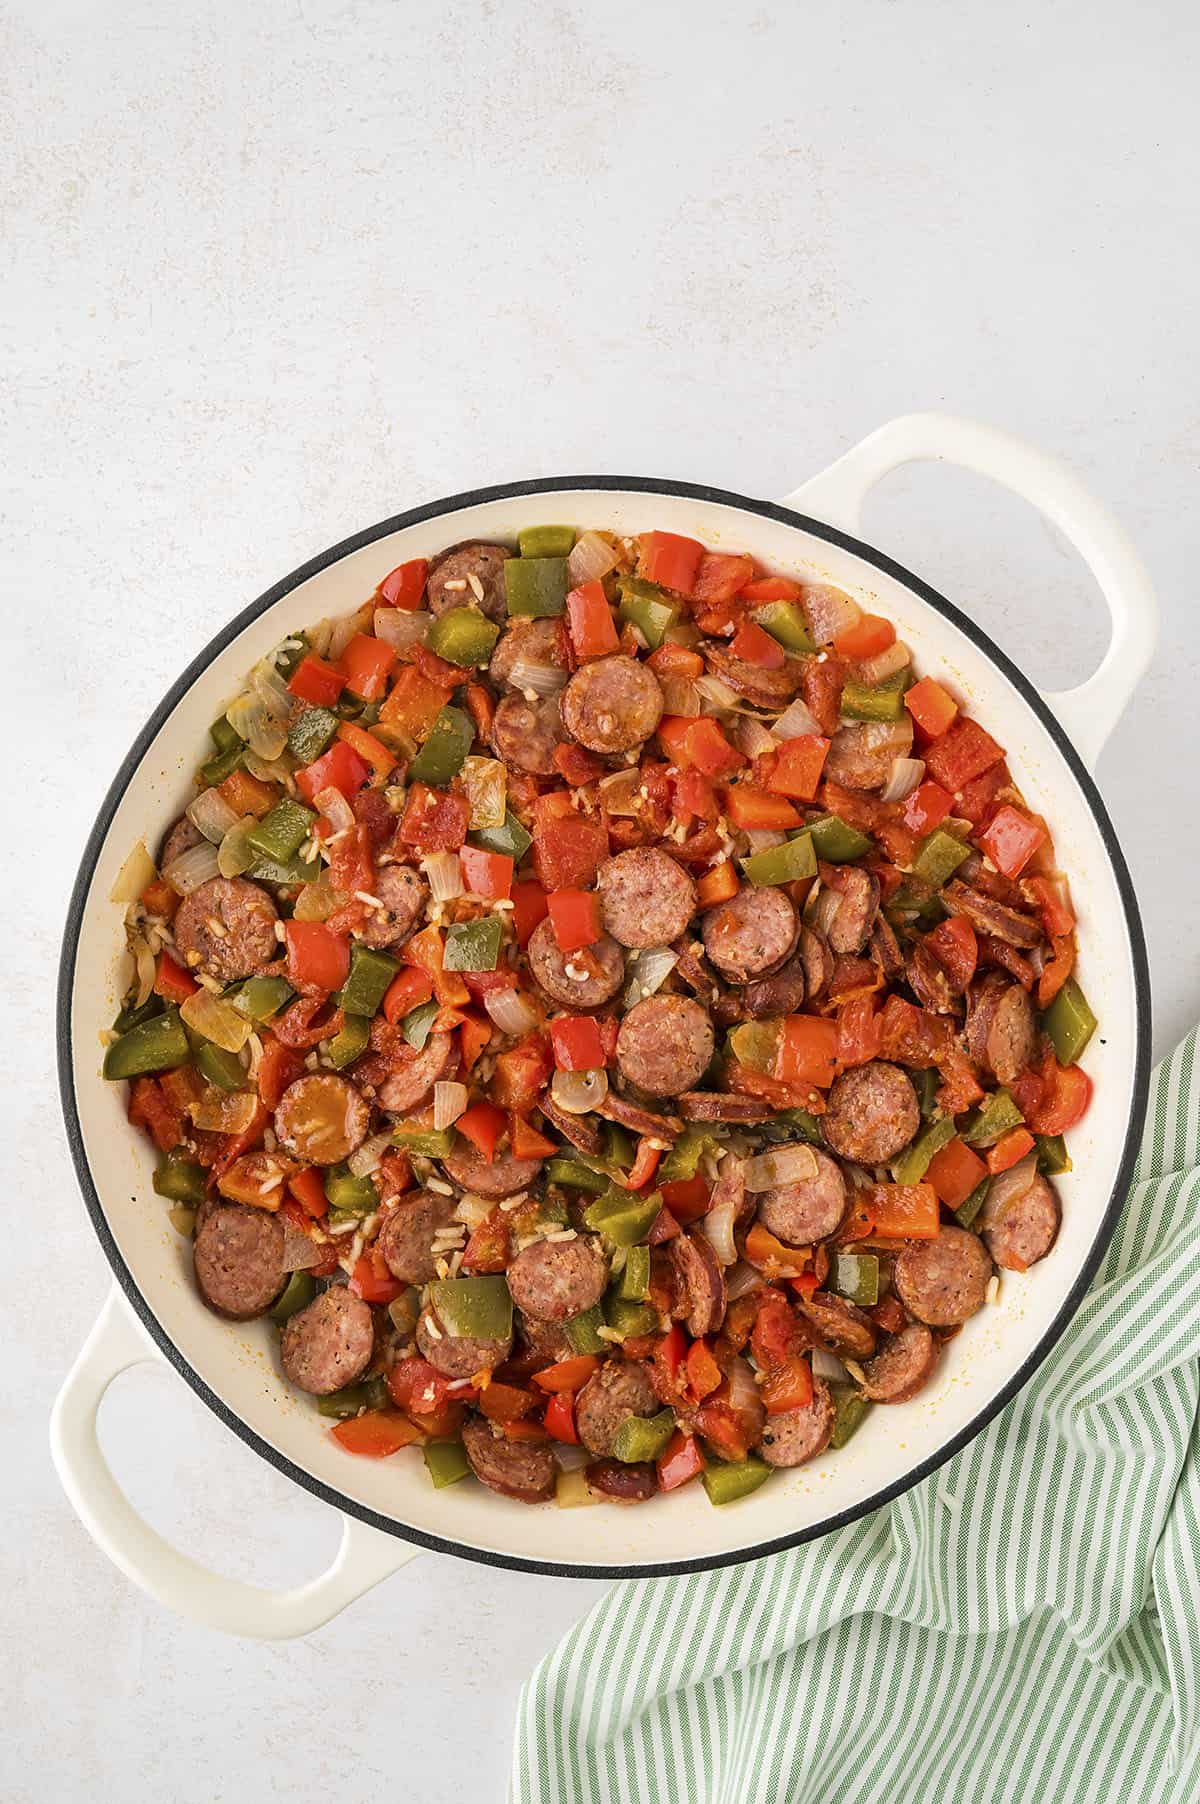 Cooke sausage and rice skillet.